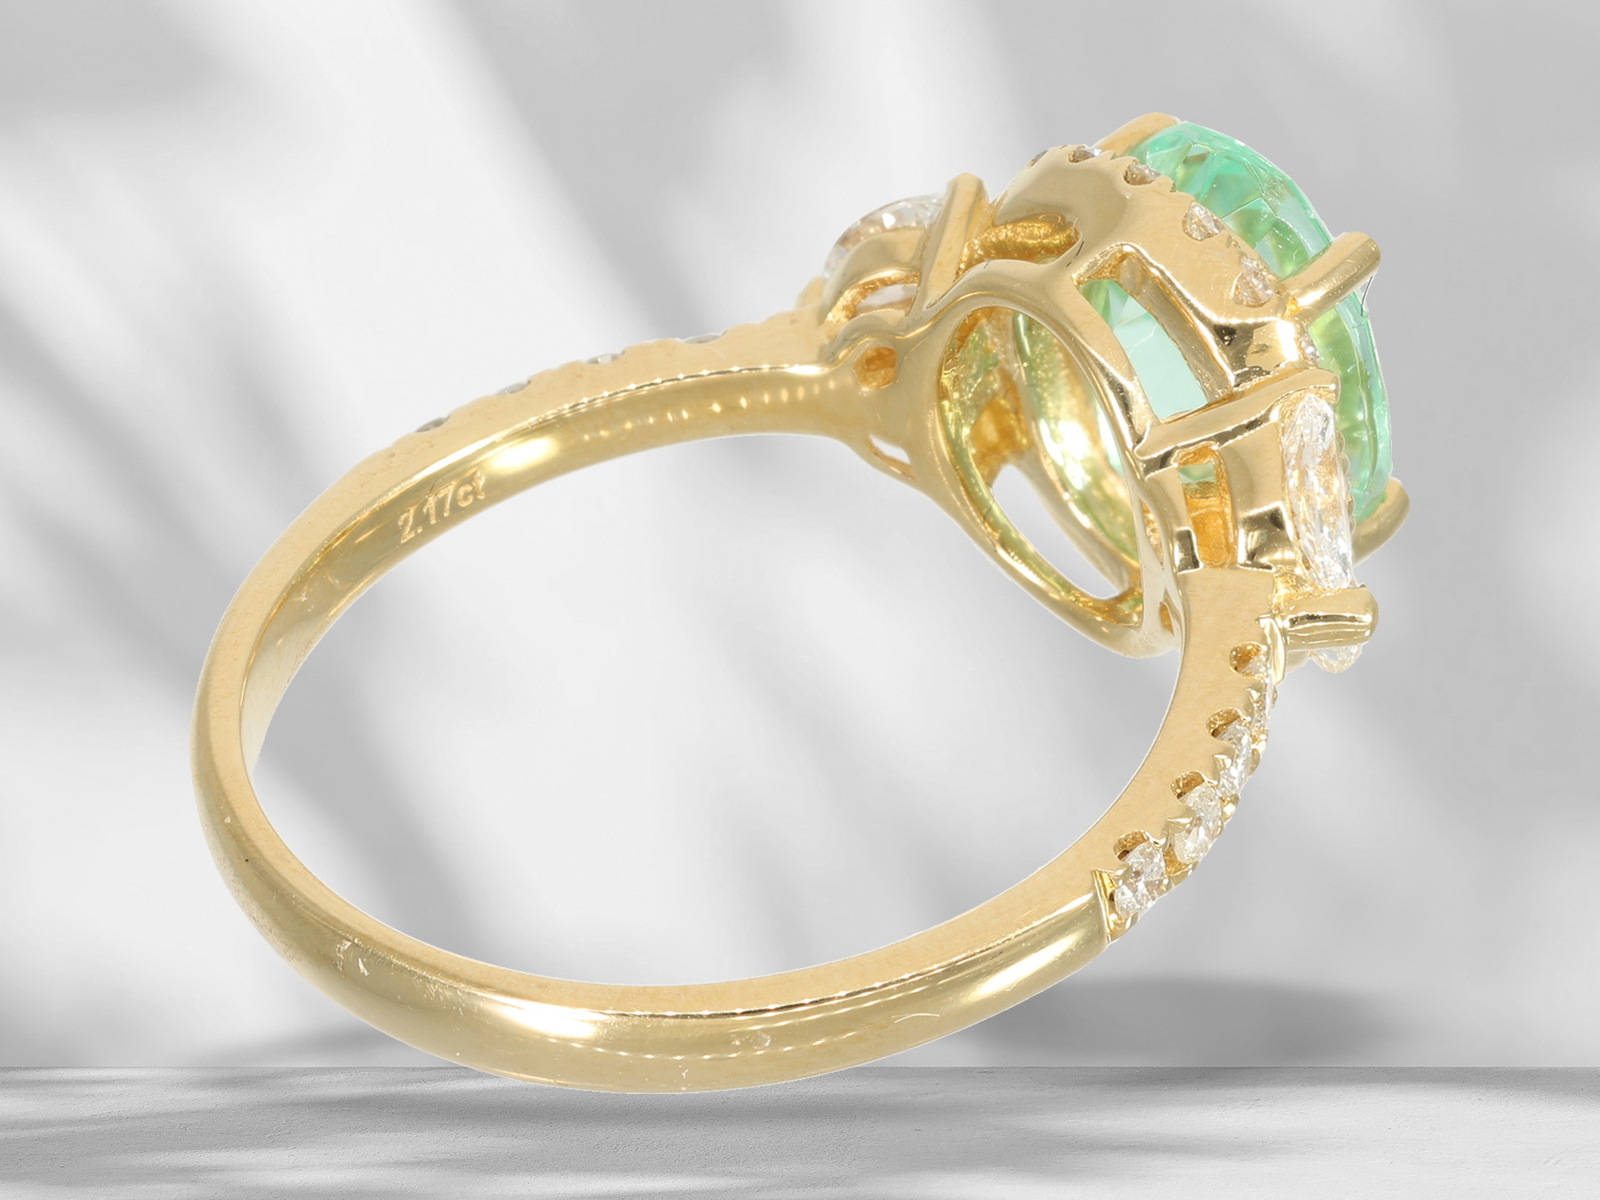 Ring: goldsmith ring with extremely rare Paraiba tourmaline and brilliant-cut diamonds, like new - Image 6 of 6